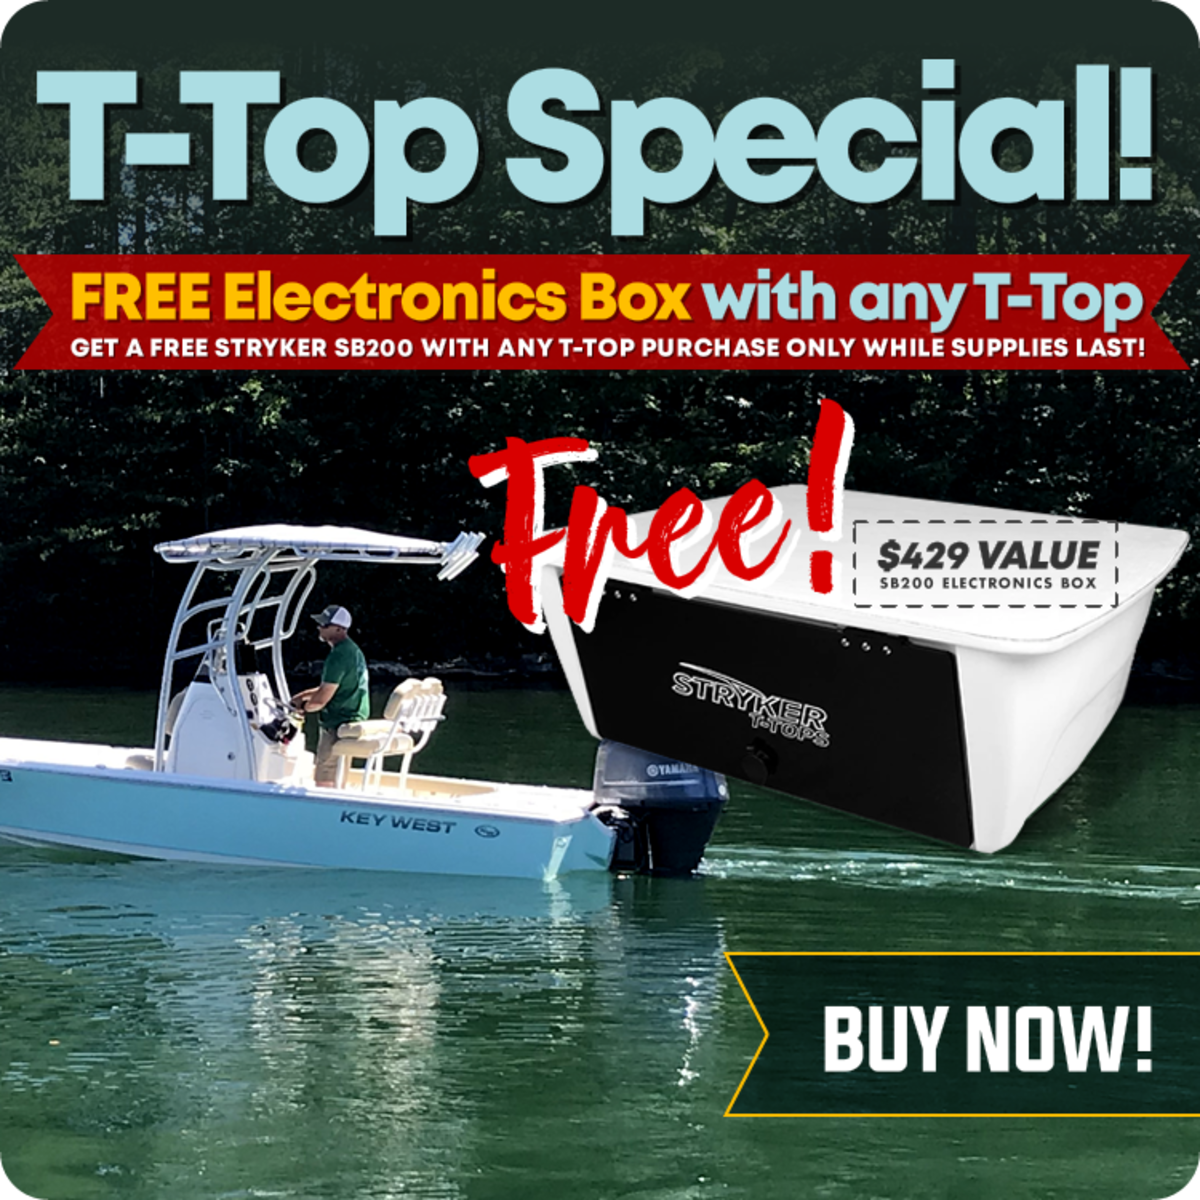 Stryker T-Tops: FREE Electronics Box with T-Top Purchase Today!